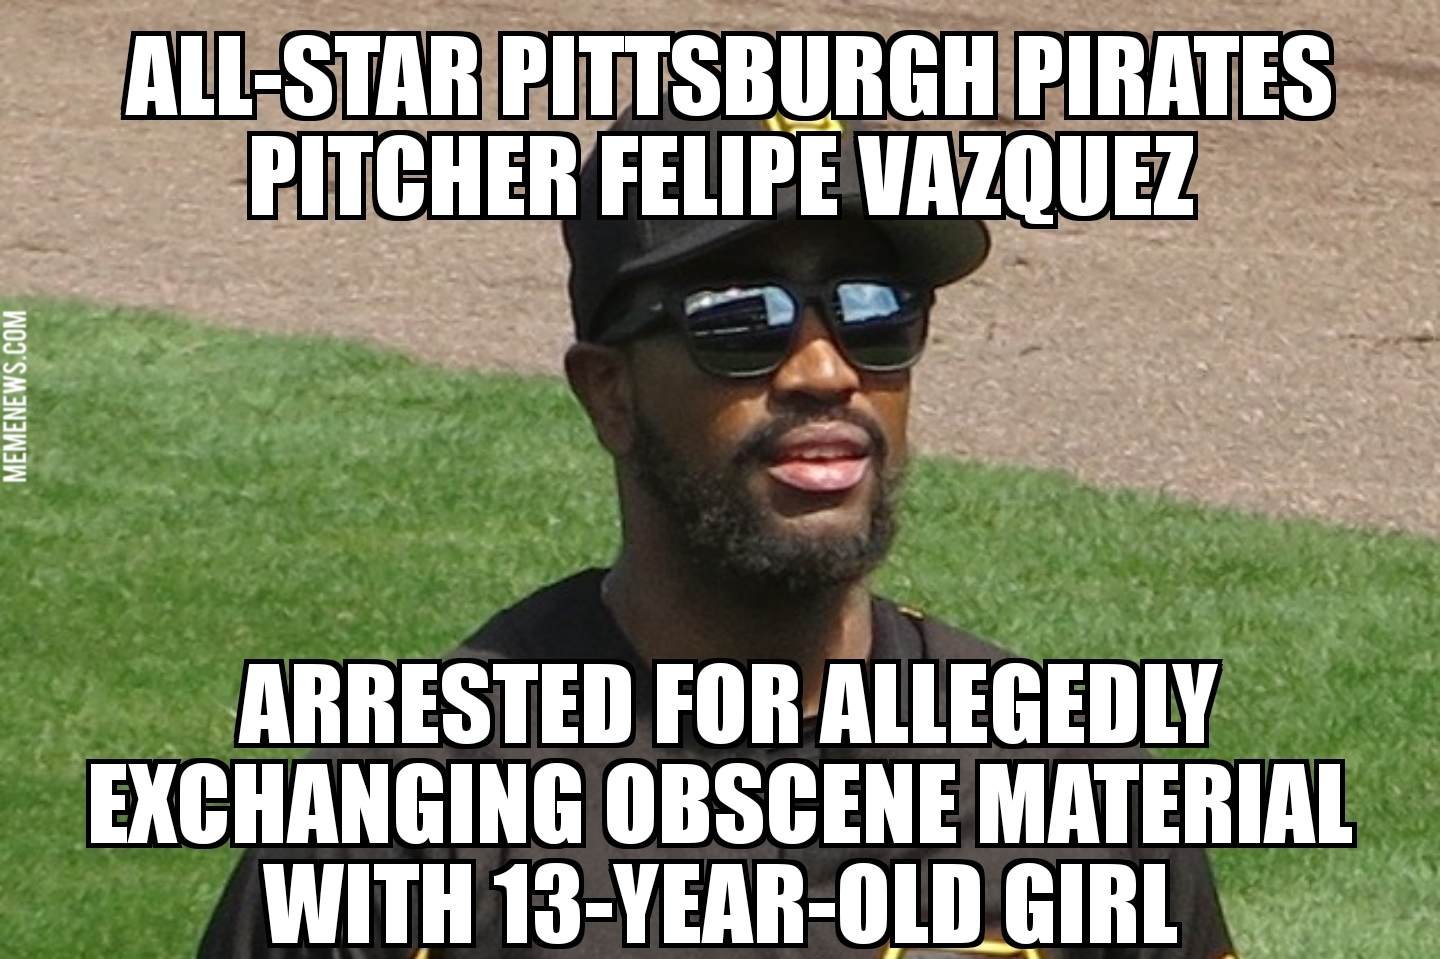 Pittsburgh Pirates pitcher Felipe Vazquez arrested for soliciting minor